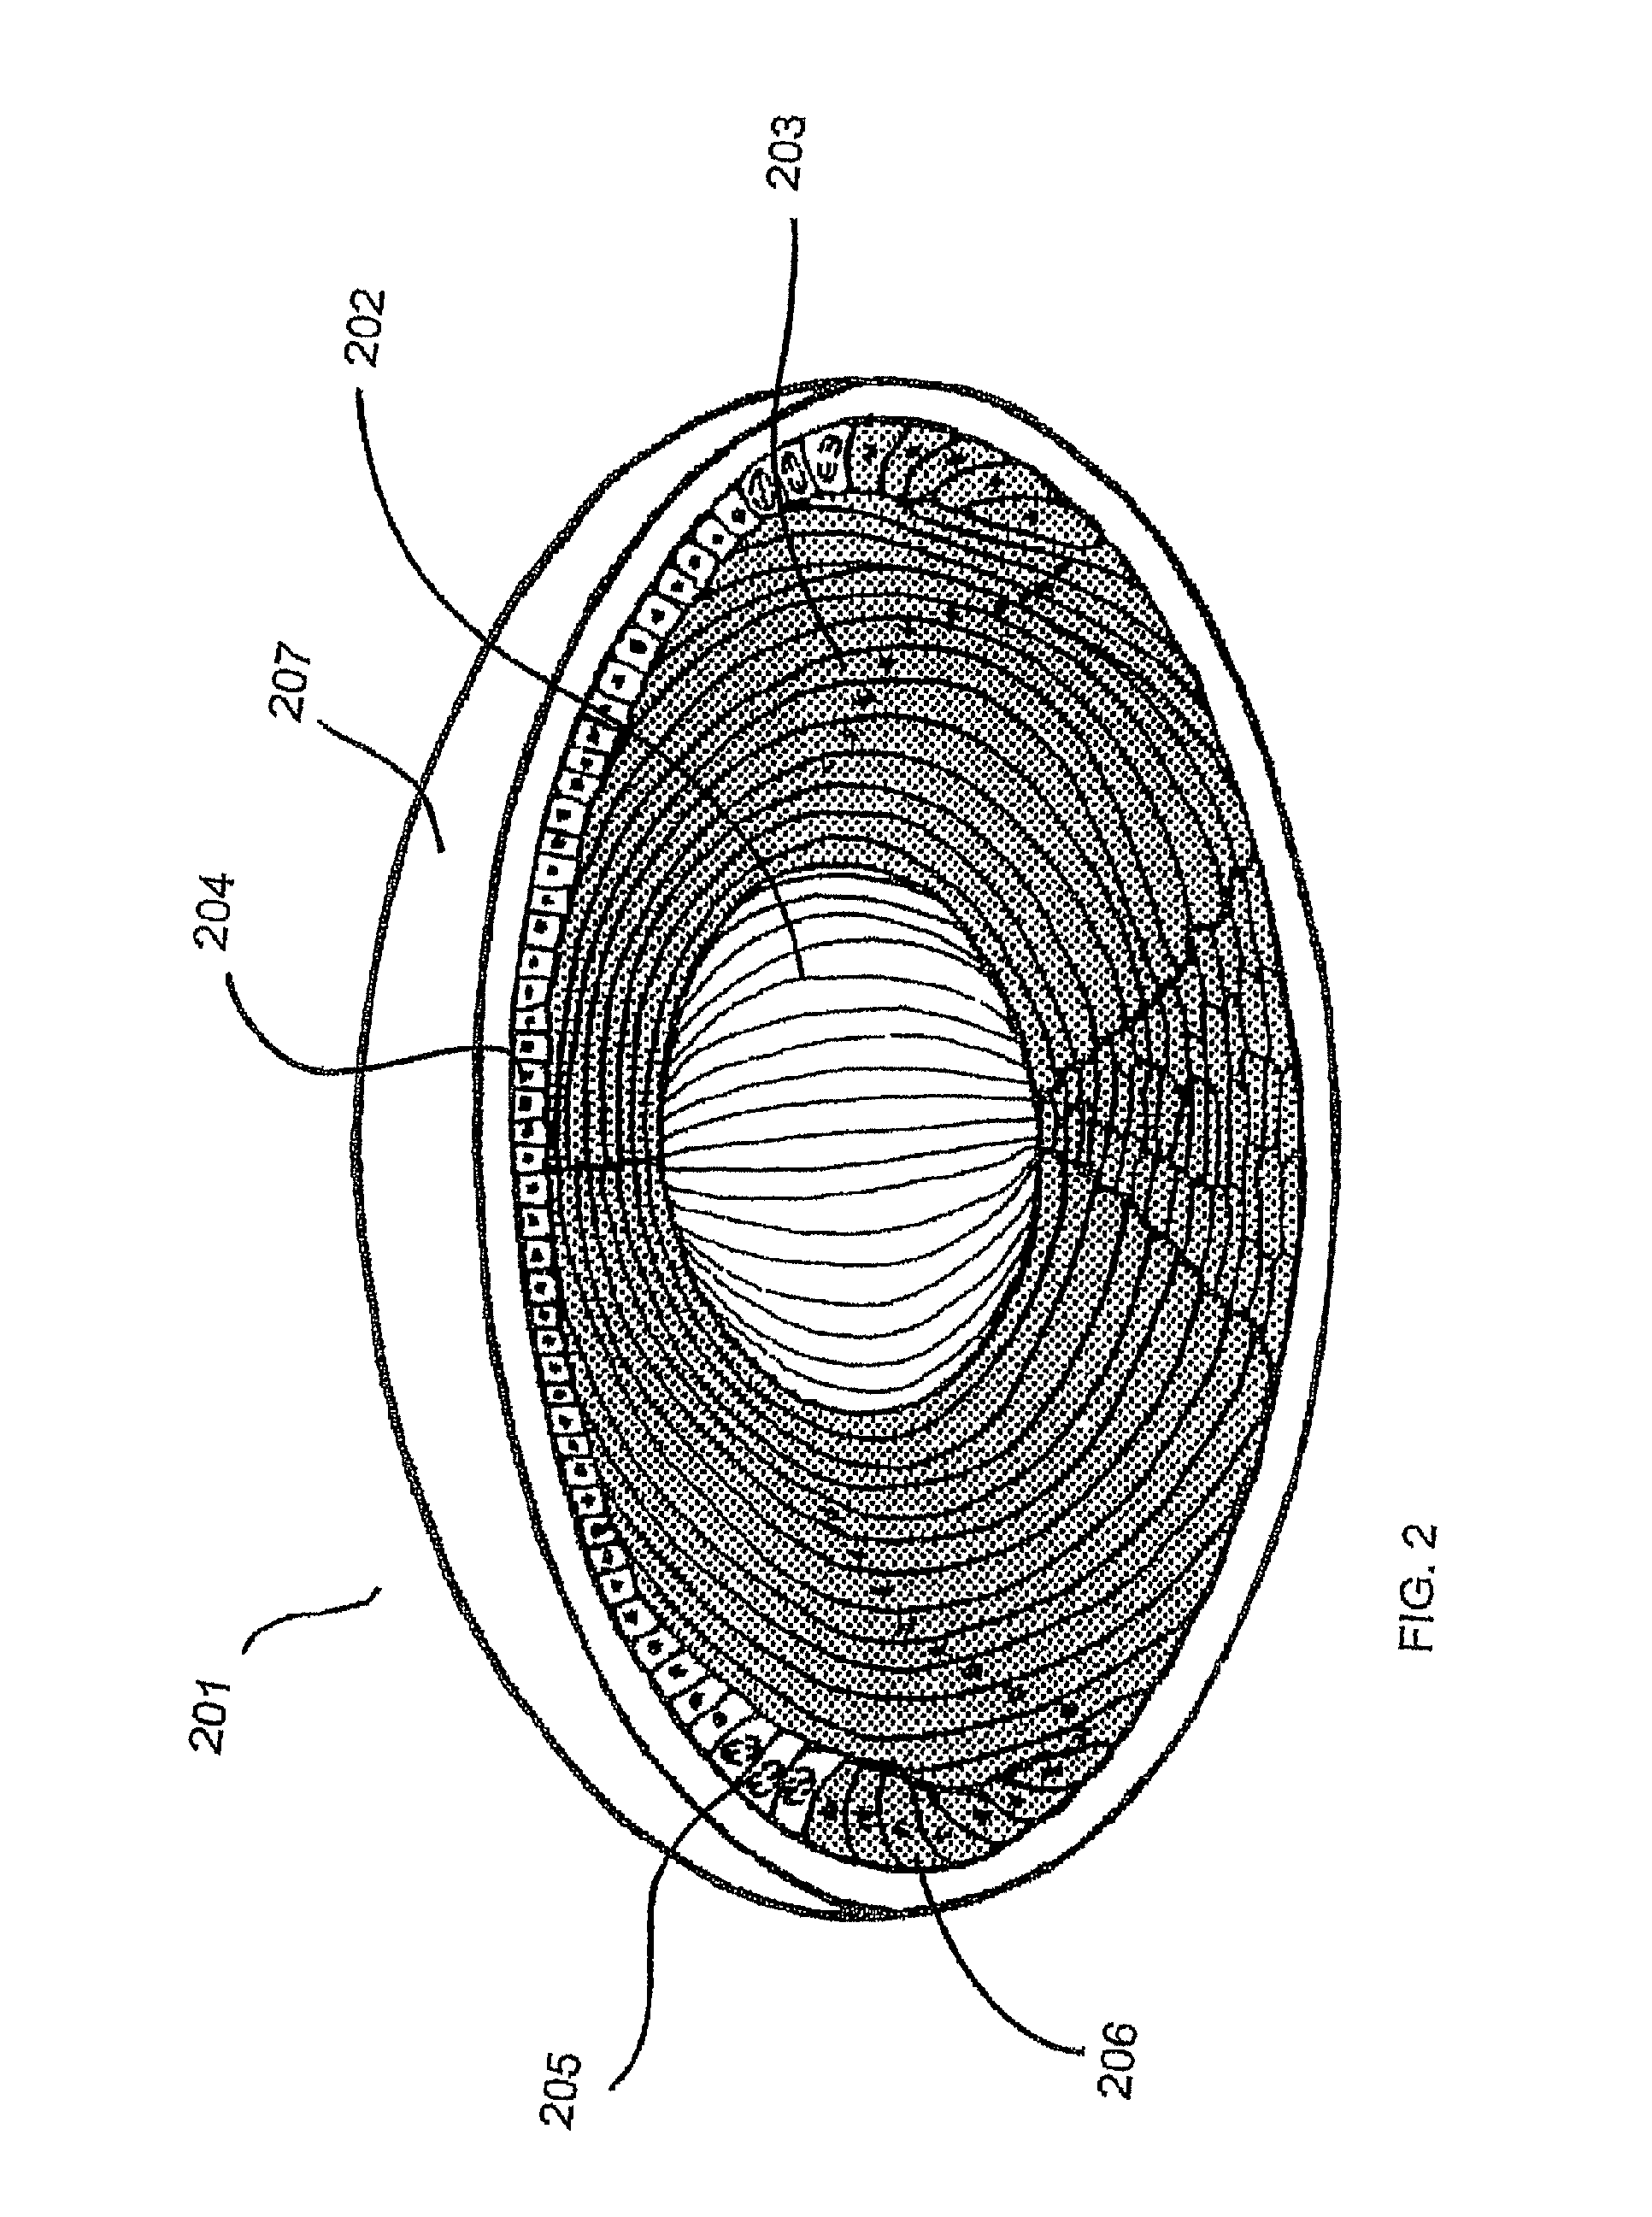 Processes and apparatus for preventing, delaying or ameliorating one or more symptoms of presbyopia